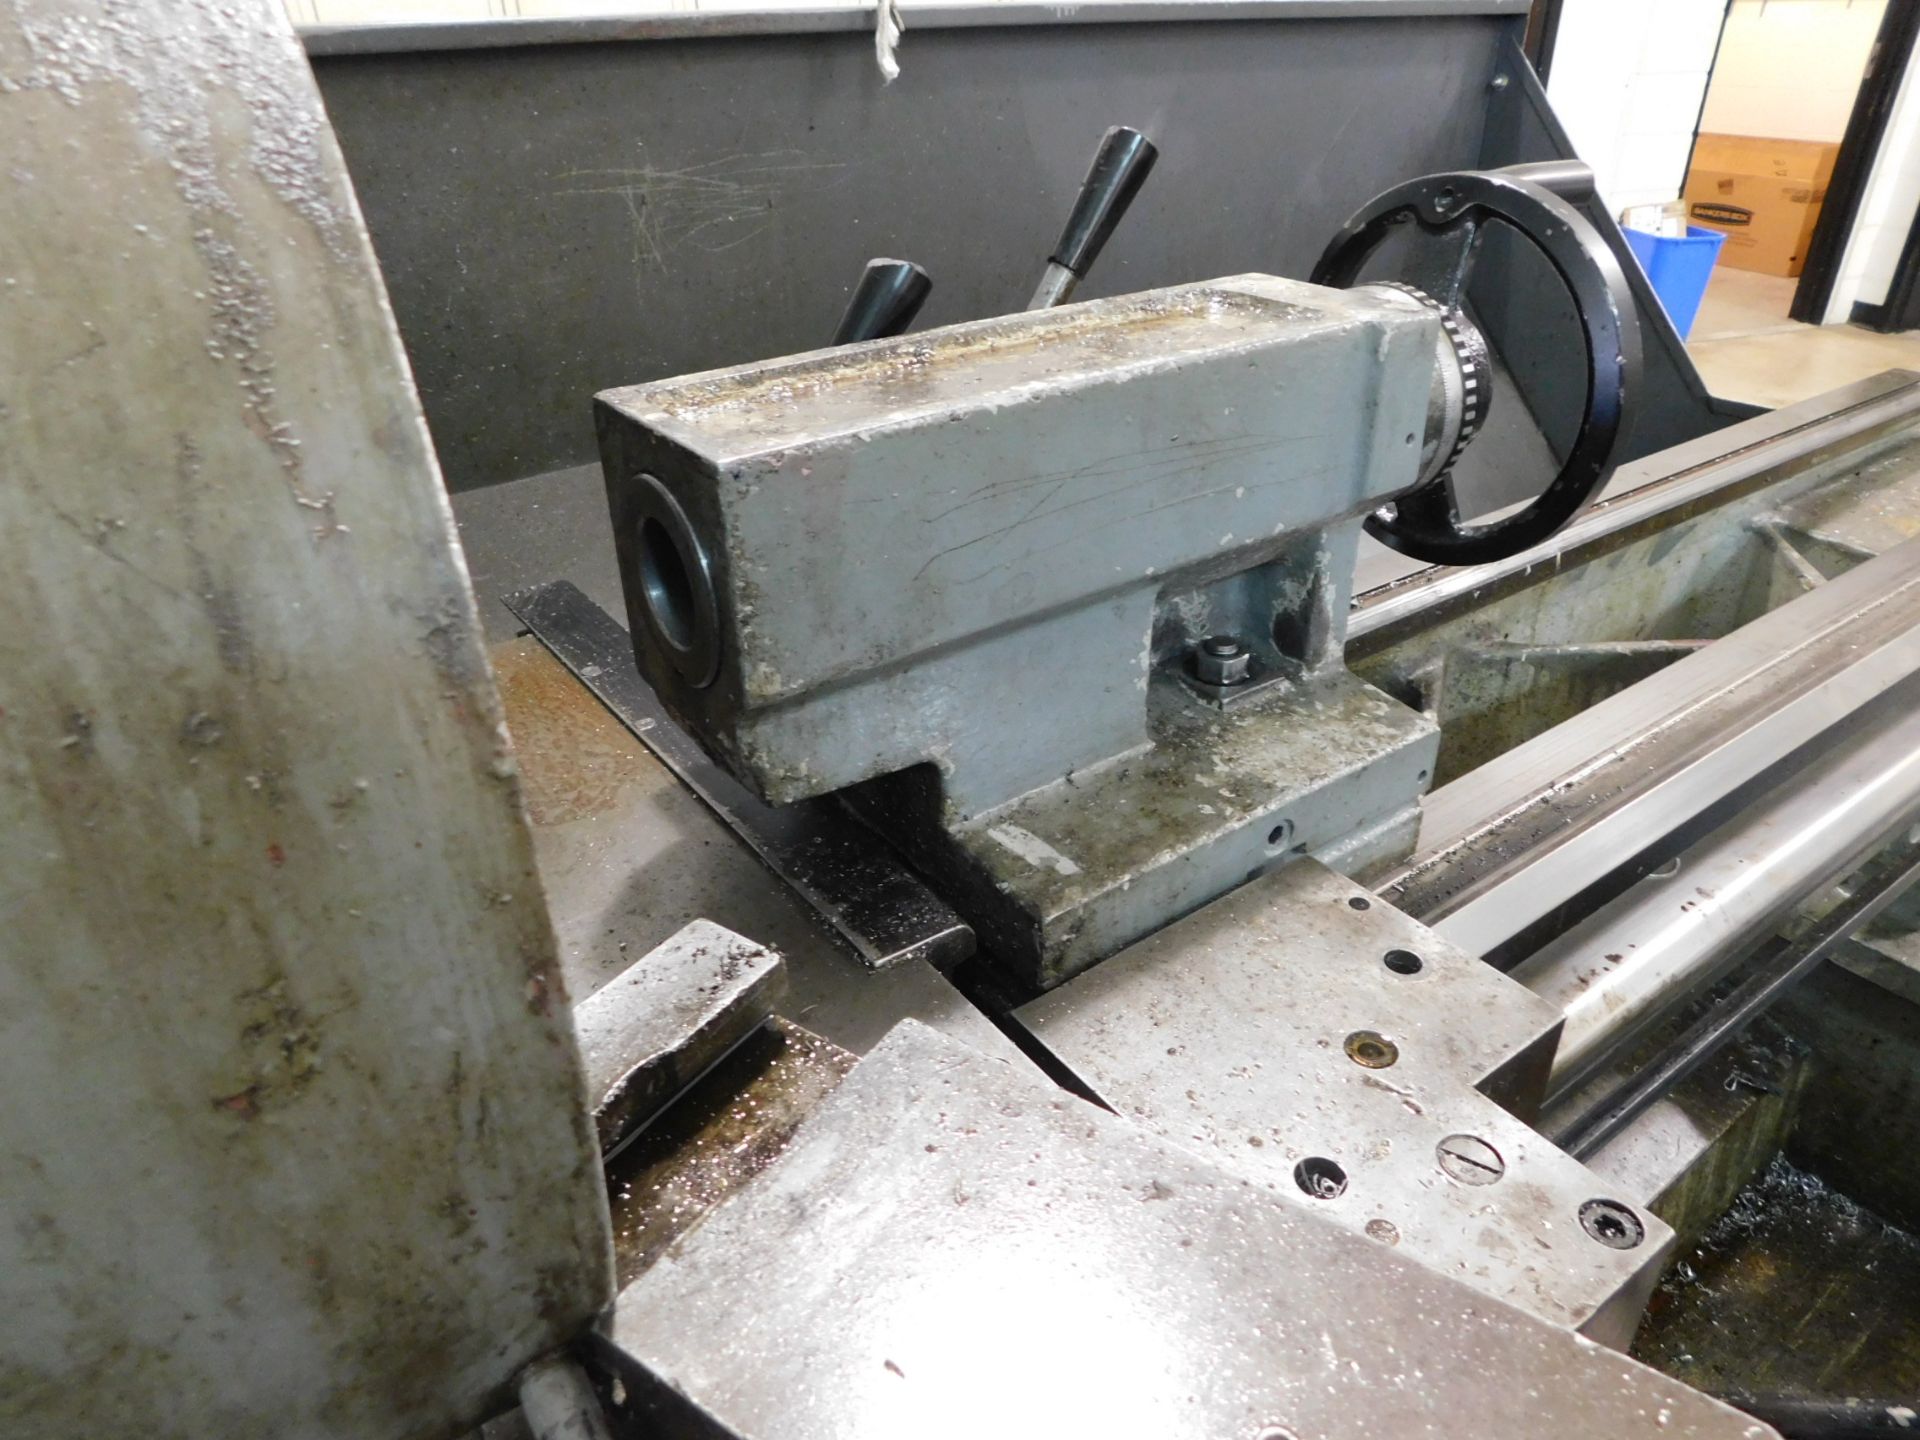 Clausing Colchester 15" x 50" Toolroom Lathe, SN TG0579-507, with Anilam Wizard 211 2-Axis Digital - Image 3 of 12